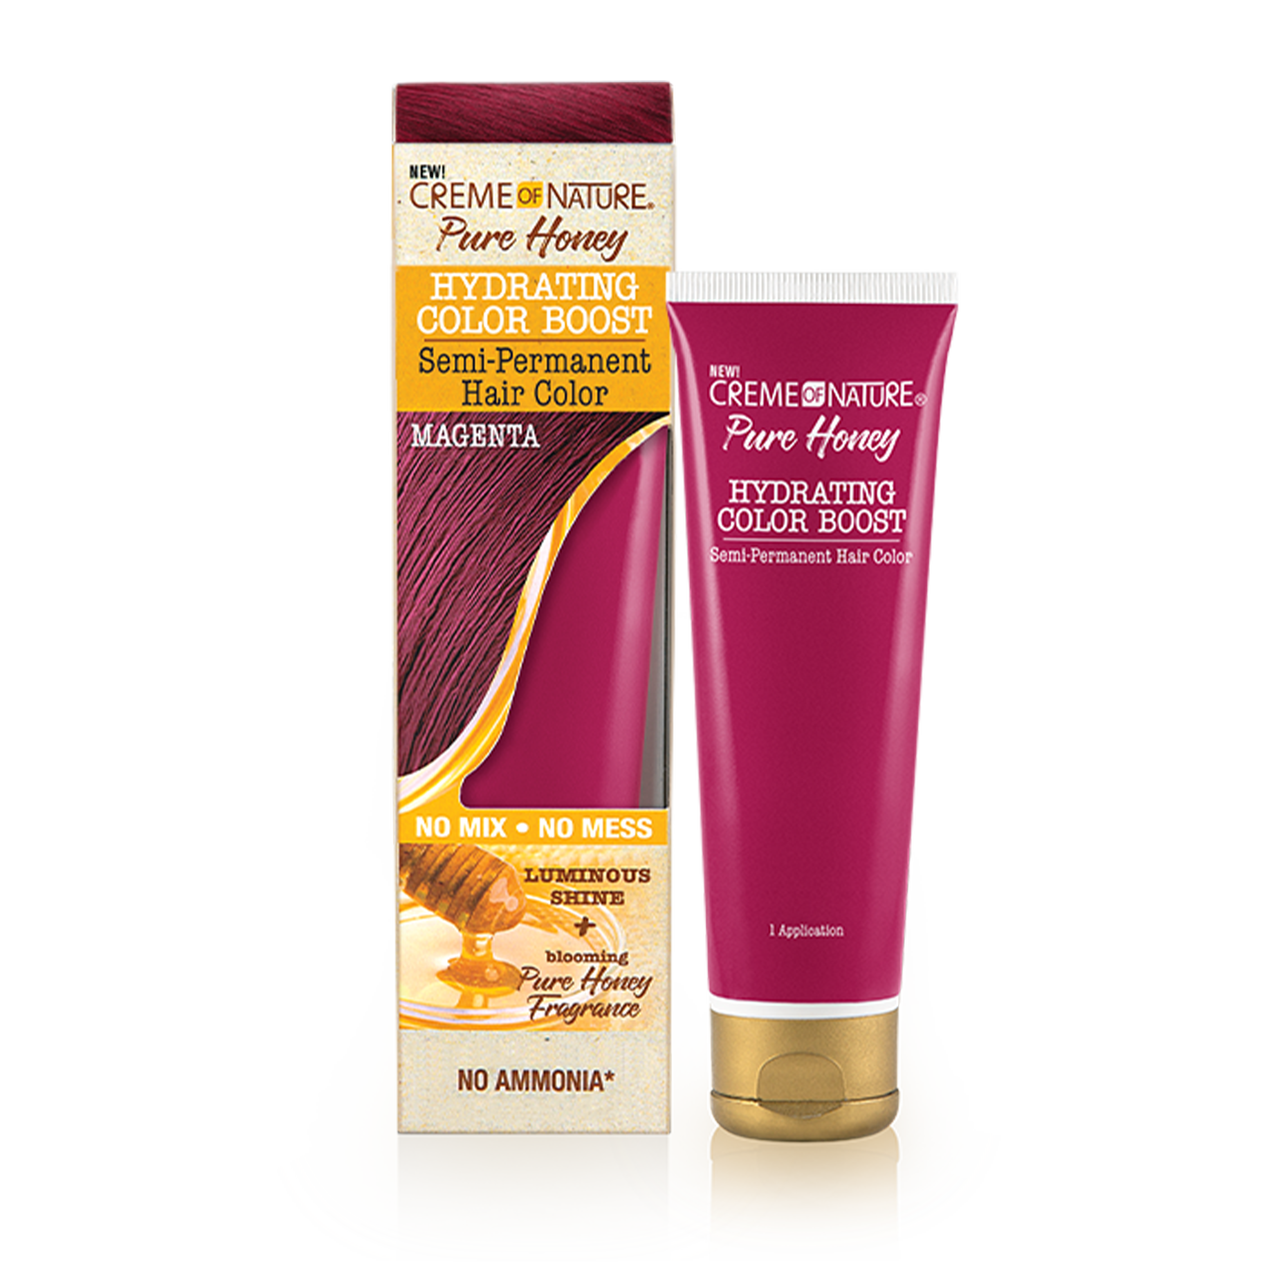 Creme of nature pure honey hydratinh color boost magenta